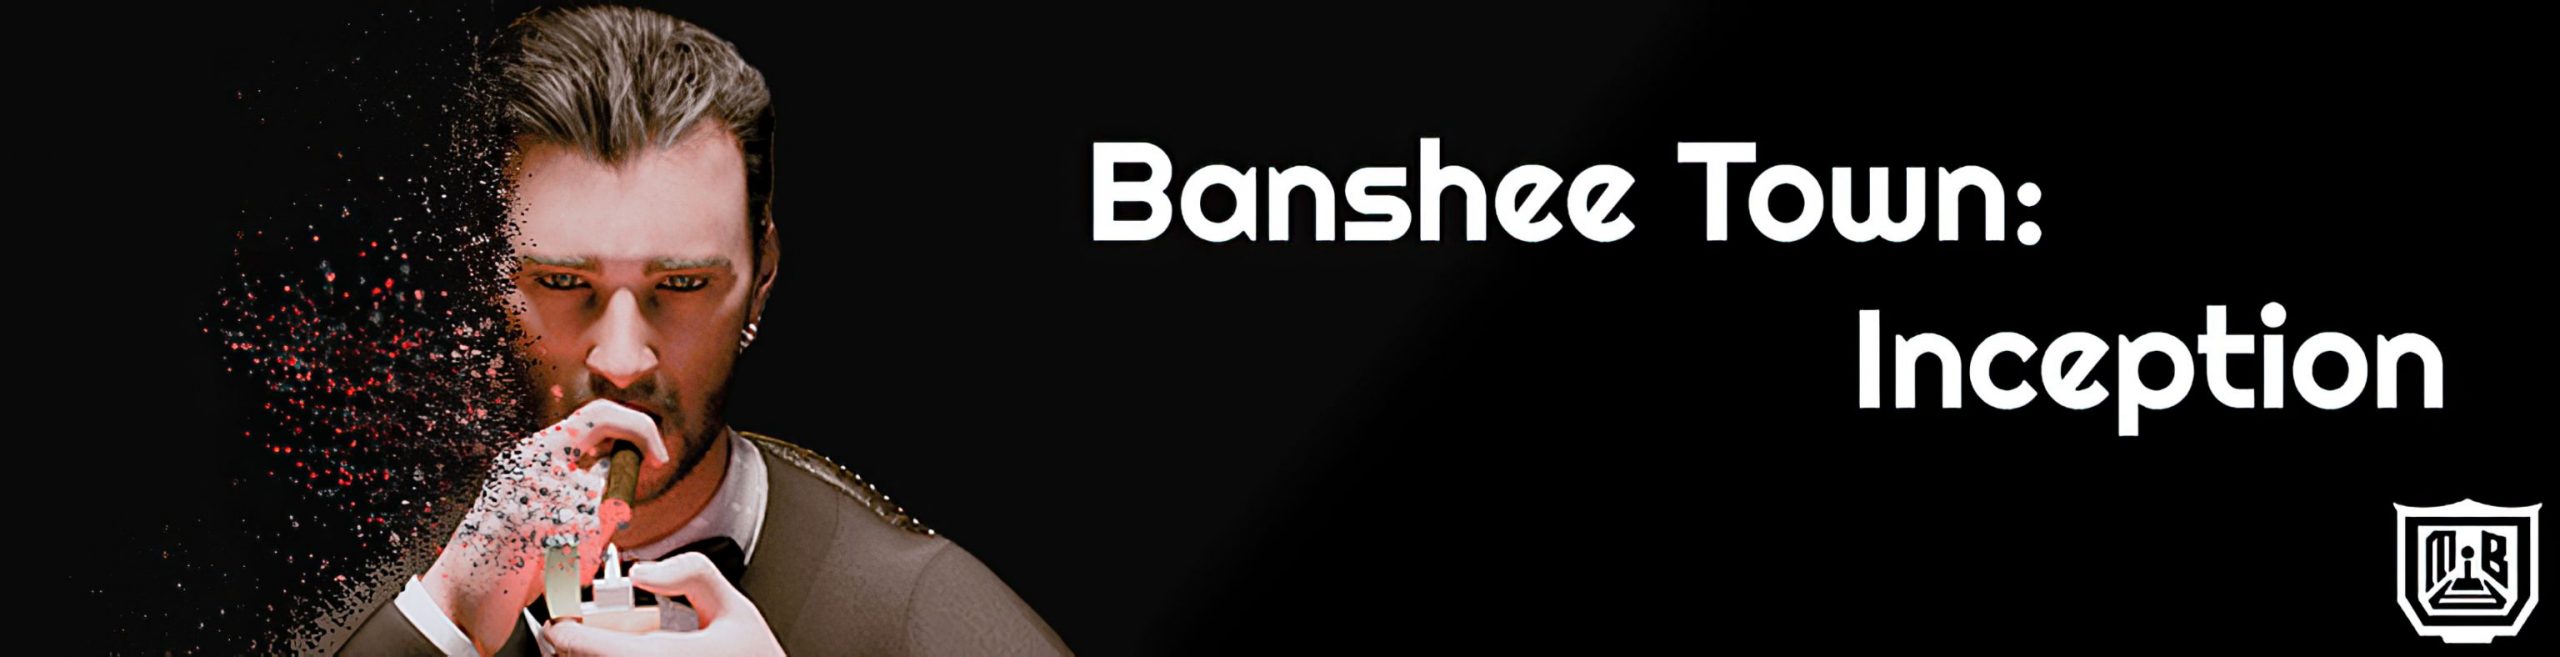 Banshee Town Apk Android Download